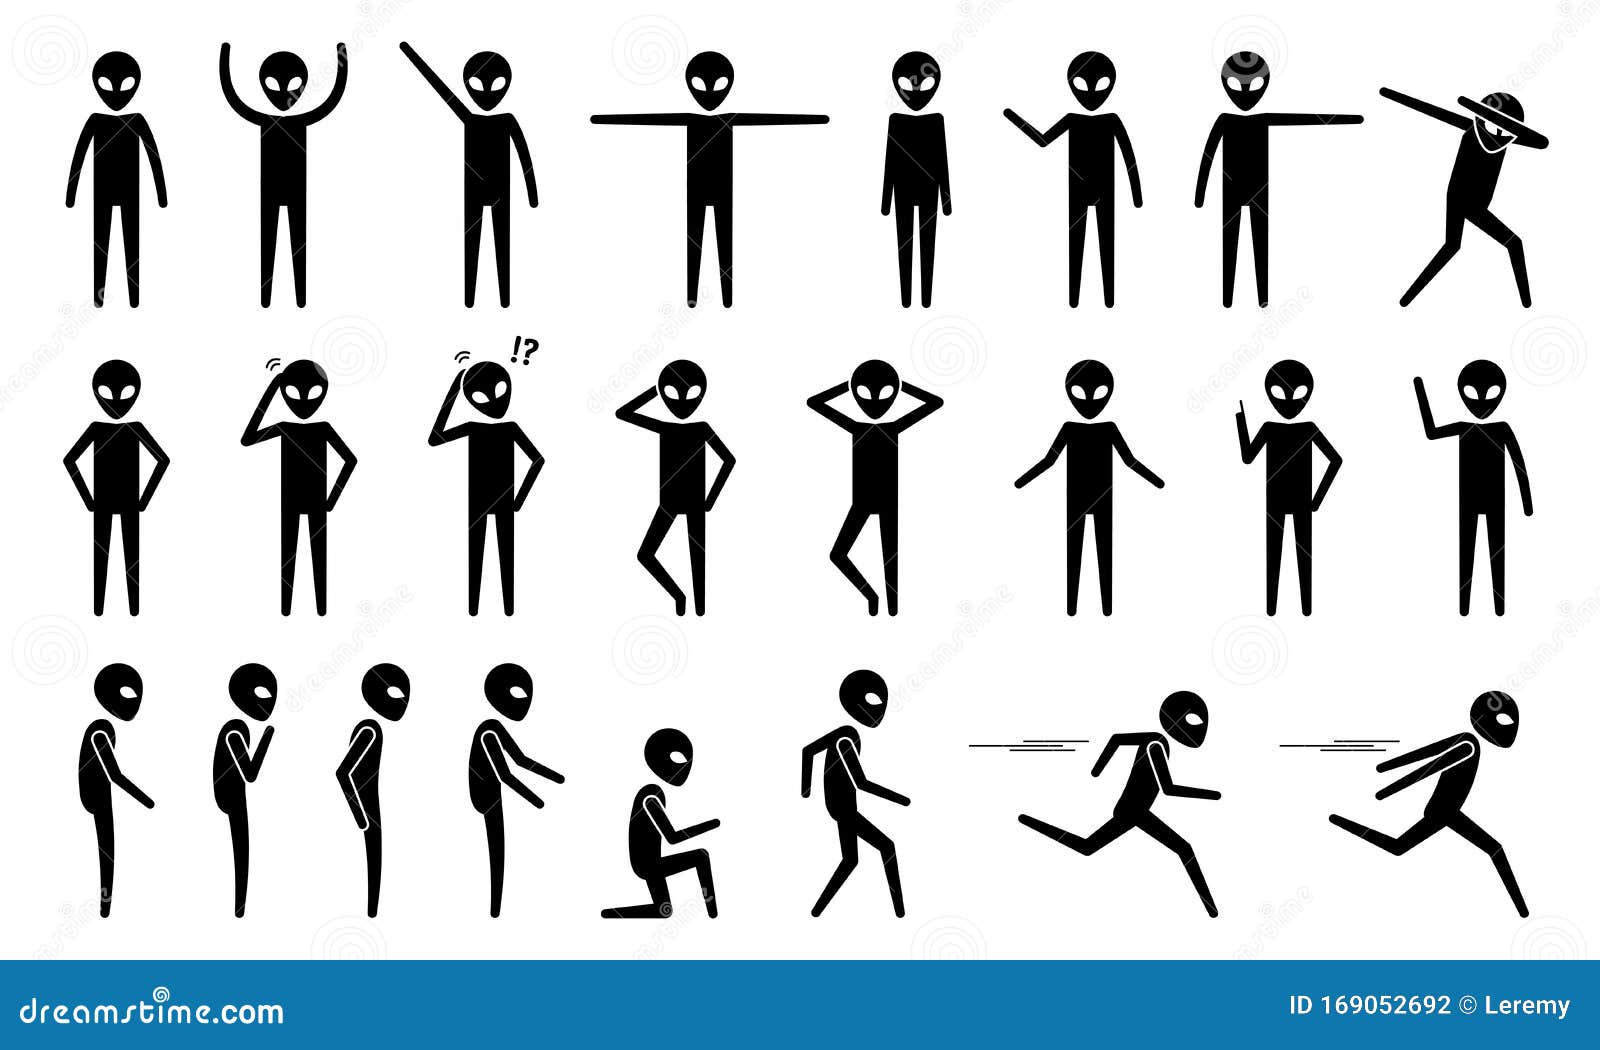 Buy Stick Figure Female Girl Lady Woman Women Actions Movement Postures Poses  Walk Walking Run Running Dashing Tip Toe Download PNG SVG Vector Online in  India - Etsy